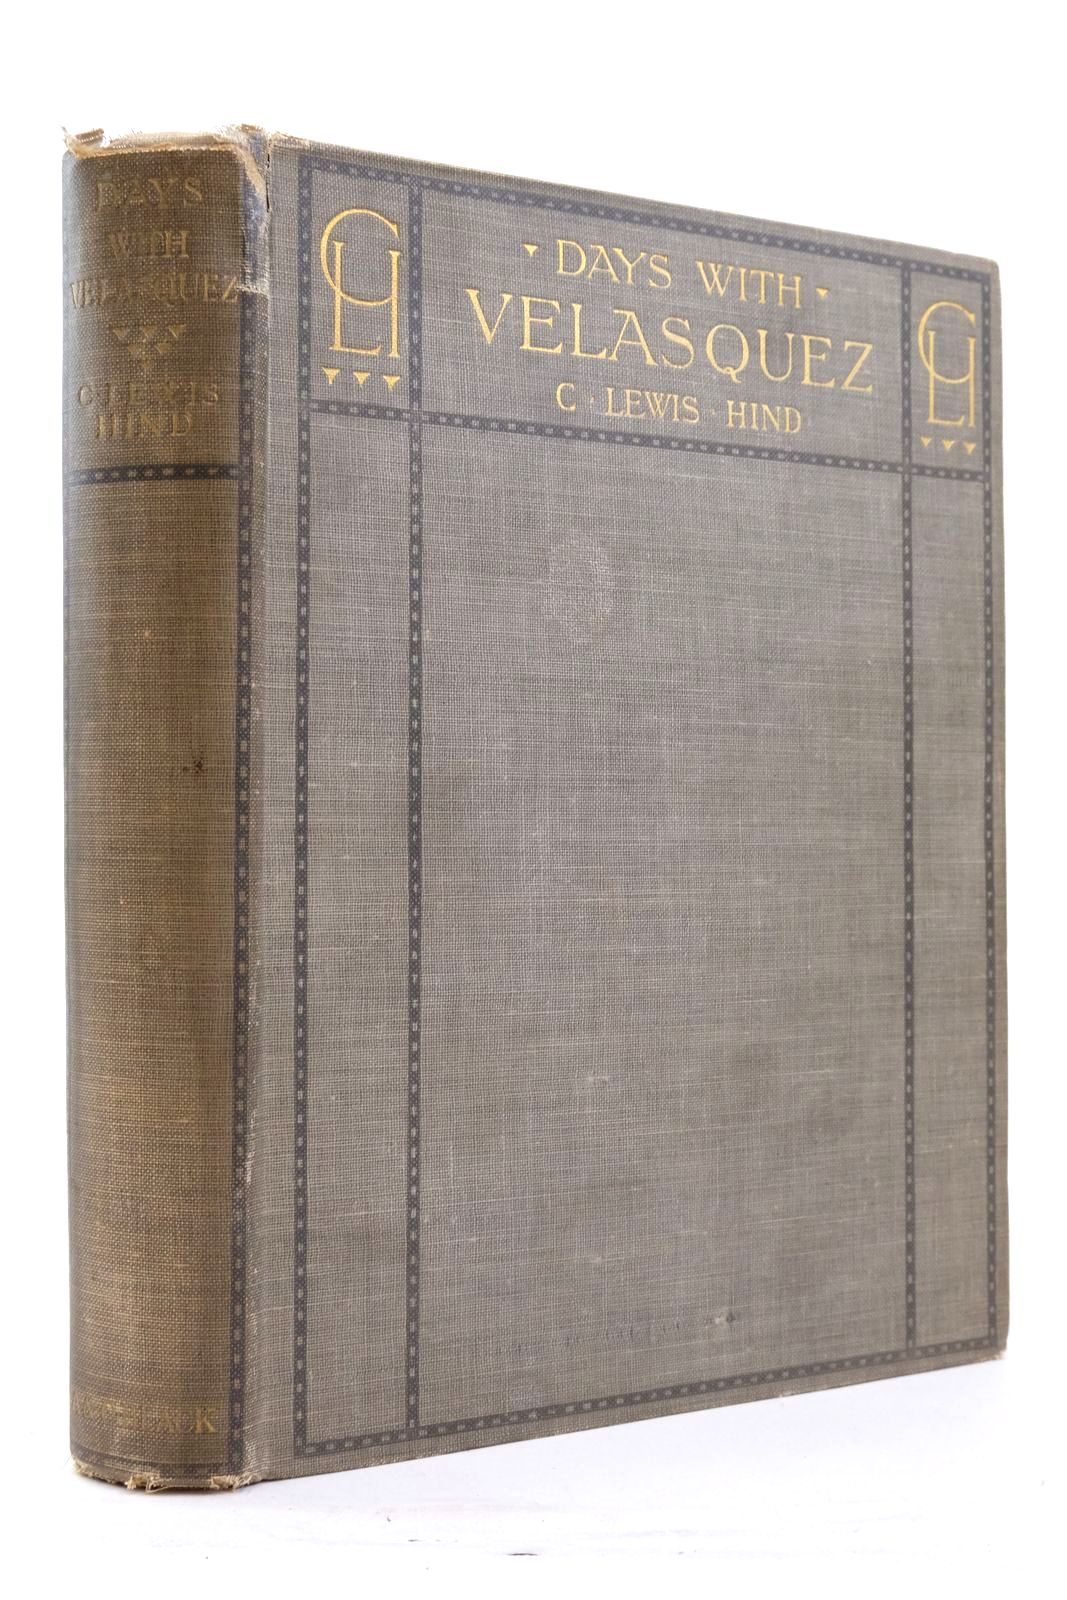 Photo of DAYS WITH VELASQUEZ written by Hind, C. Lewis illustrated by Velasquez, Diego published by Adam & Charles Black (STOCK CODE: 2137354)  for sale by Stella & Rose's Books